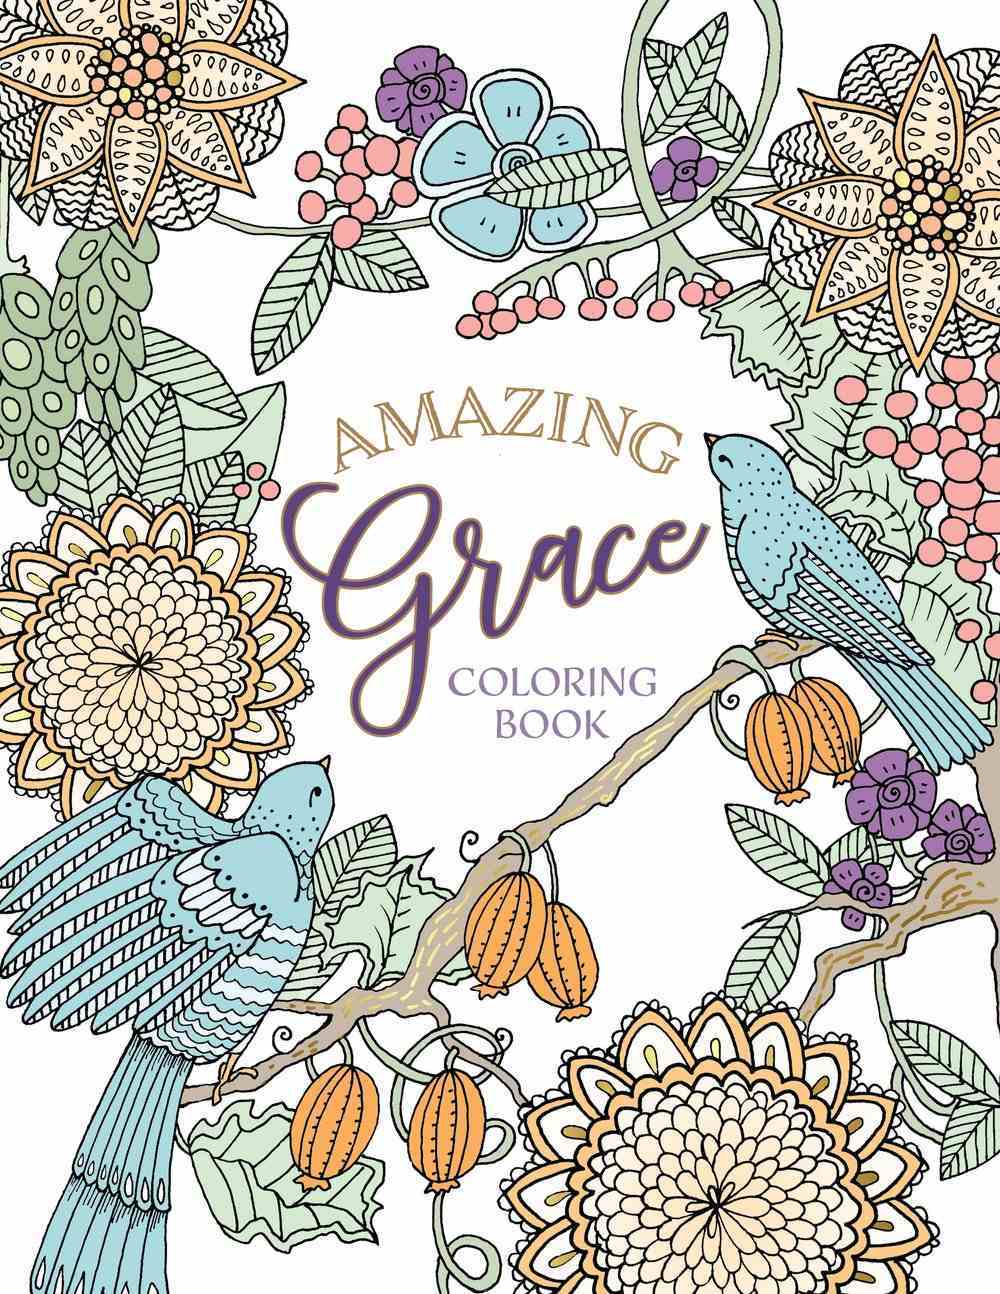 Amazing Grace: Coloring Book (Adult Coloring Books Series) Paperback